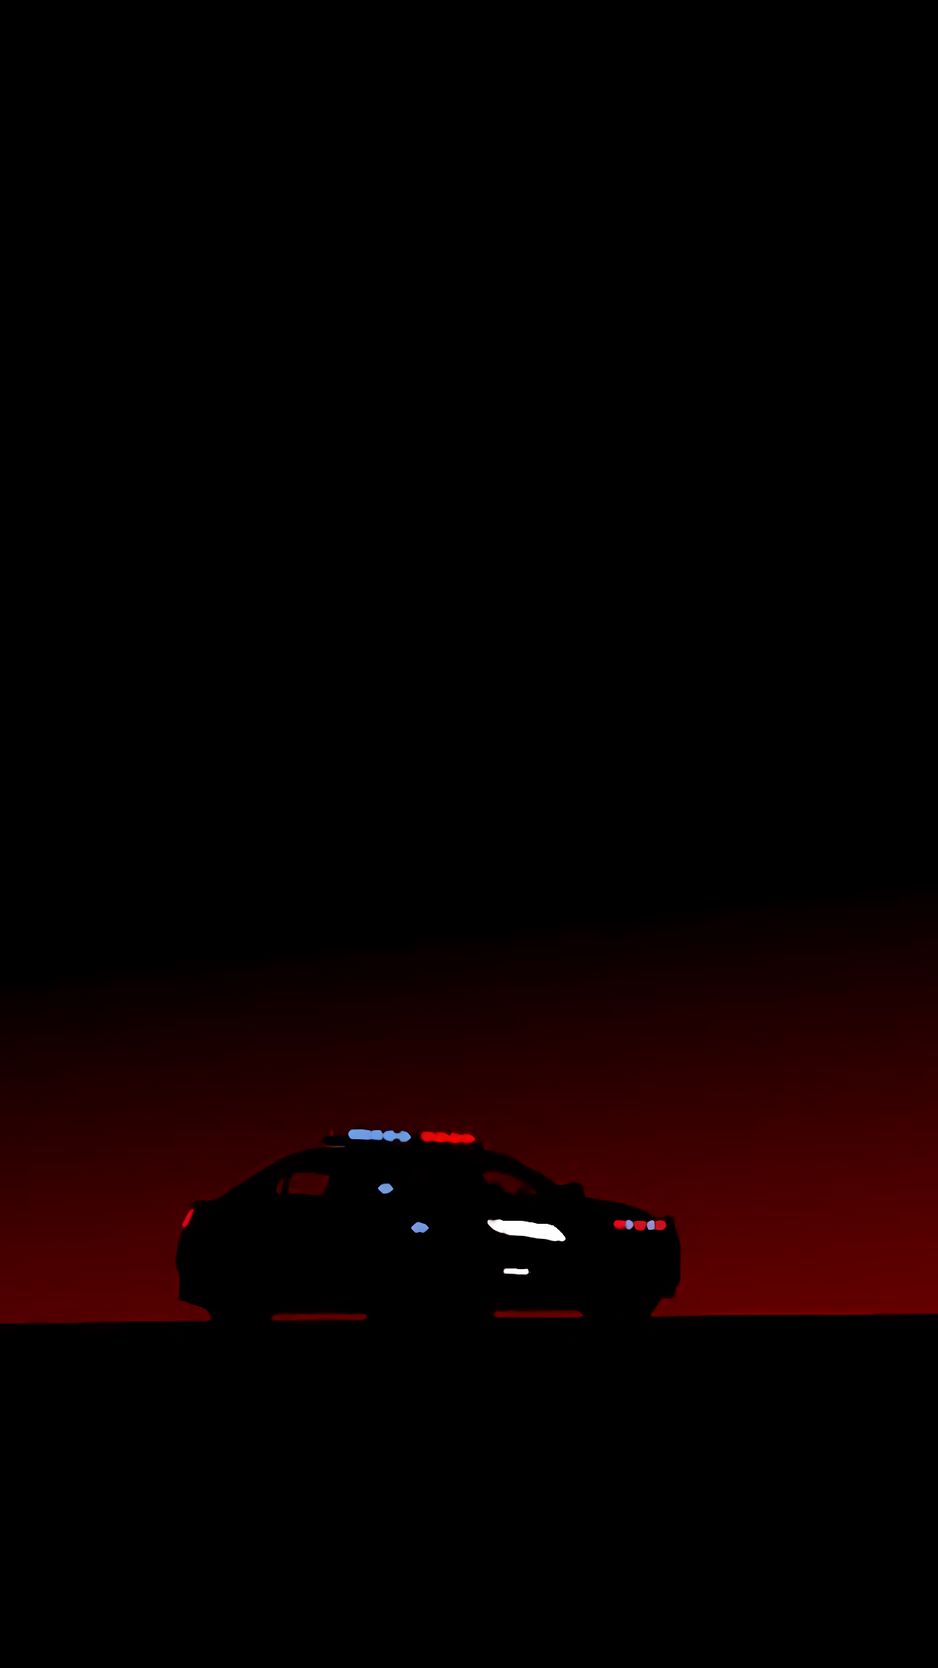 Download wallpaper 938x1668 car, art, outlines, minimalism, night iphone  8/7/6s/6 for parallax hd background